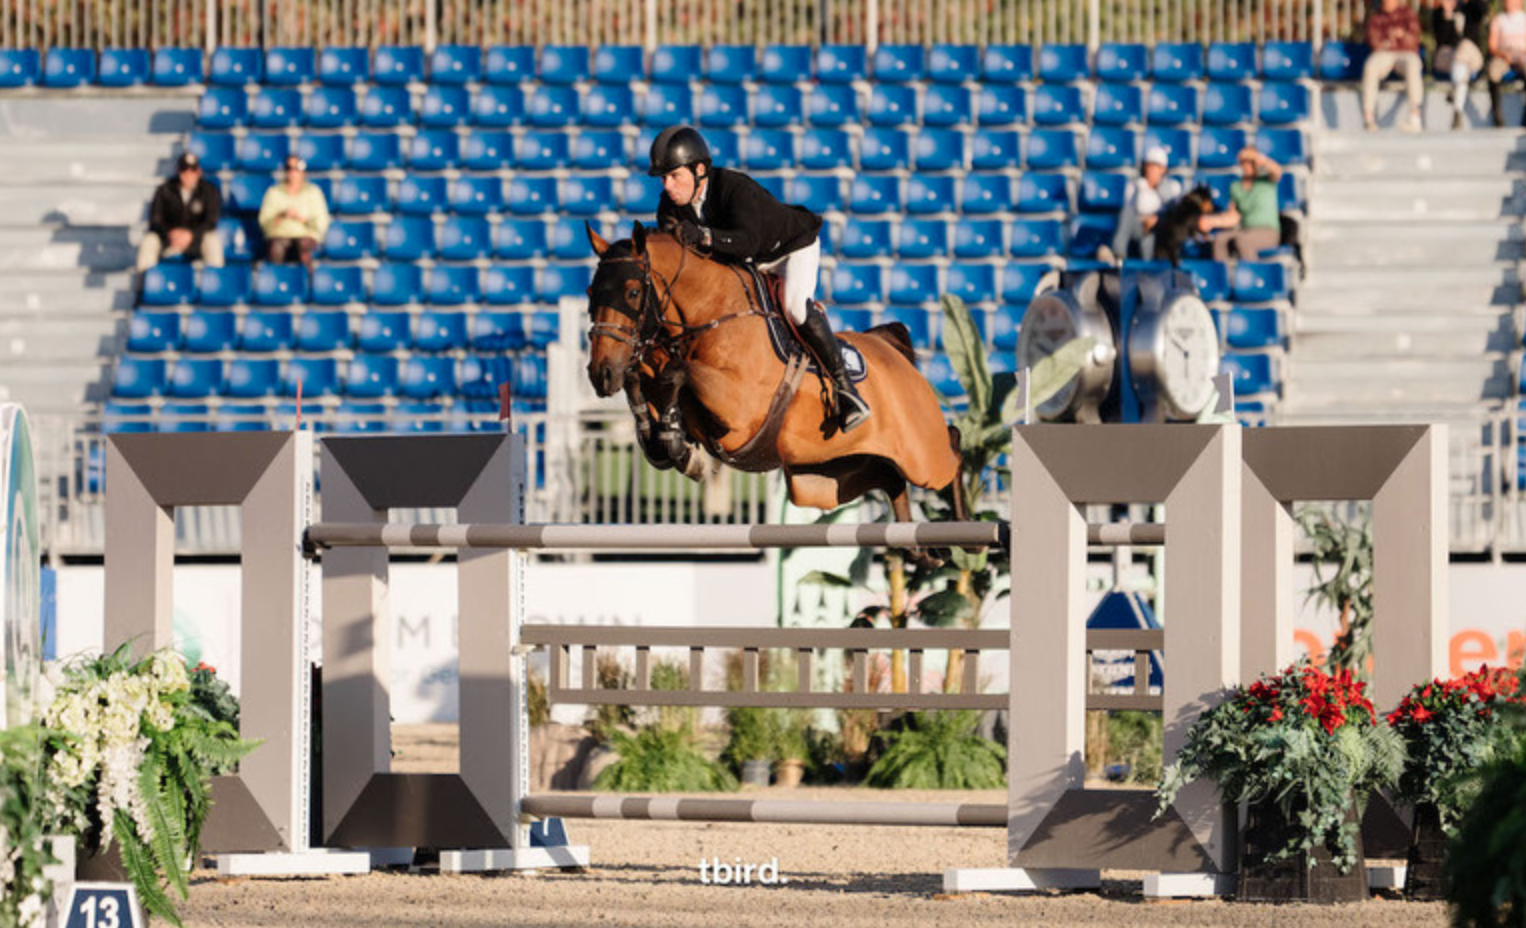 Swail is swift in $75,000 CSI4*-W Welcome 1.50m in Vancouver